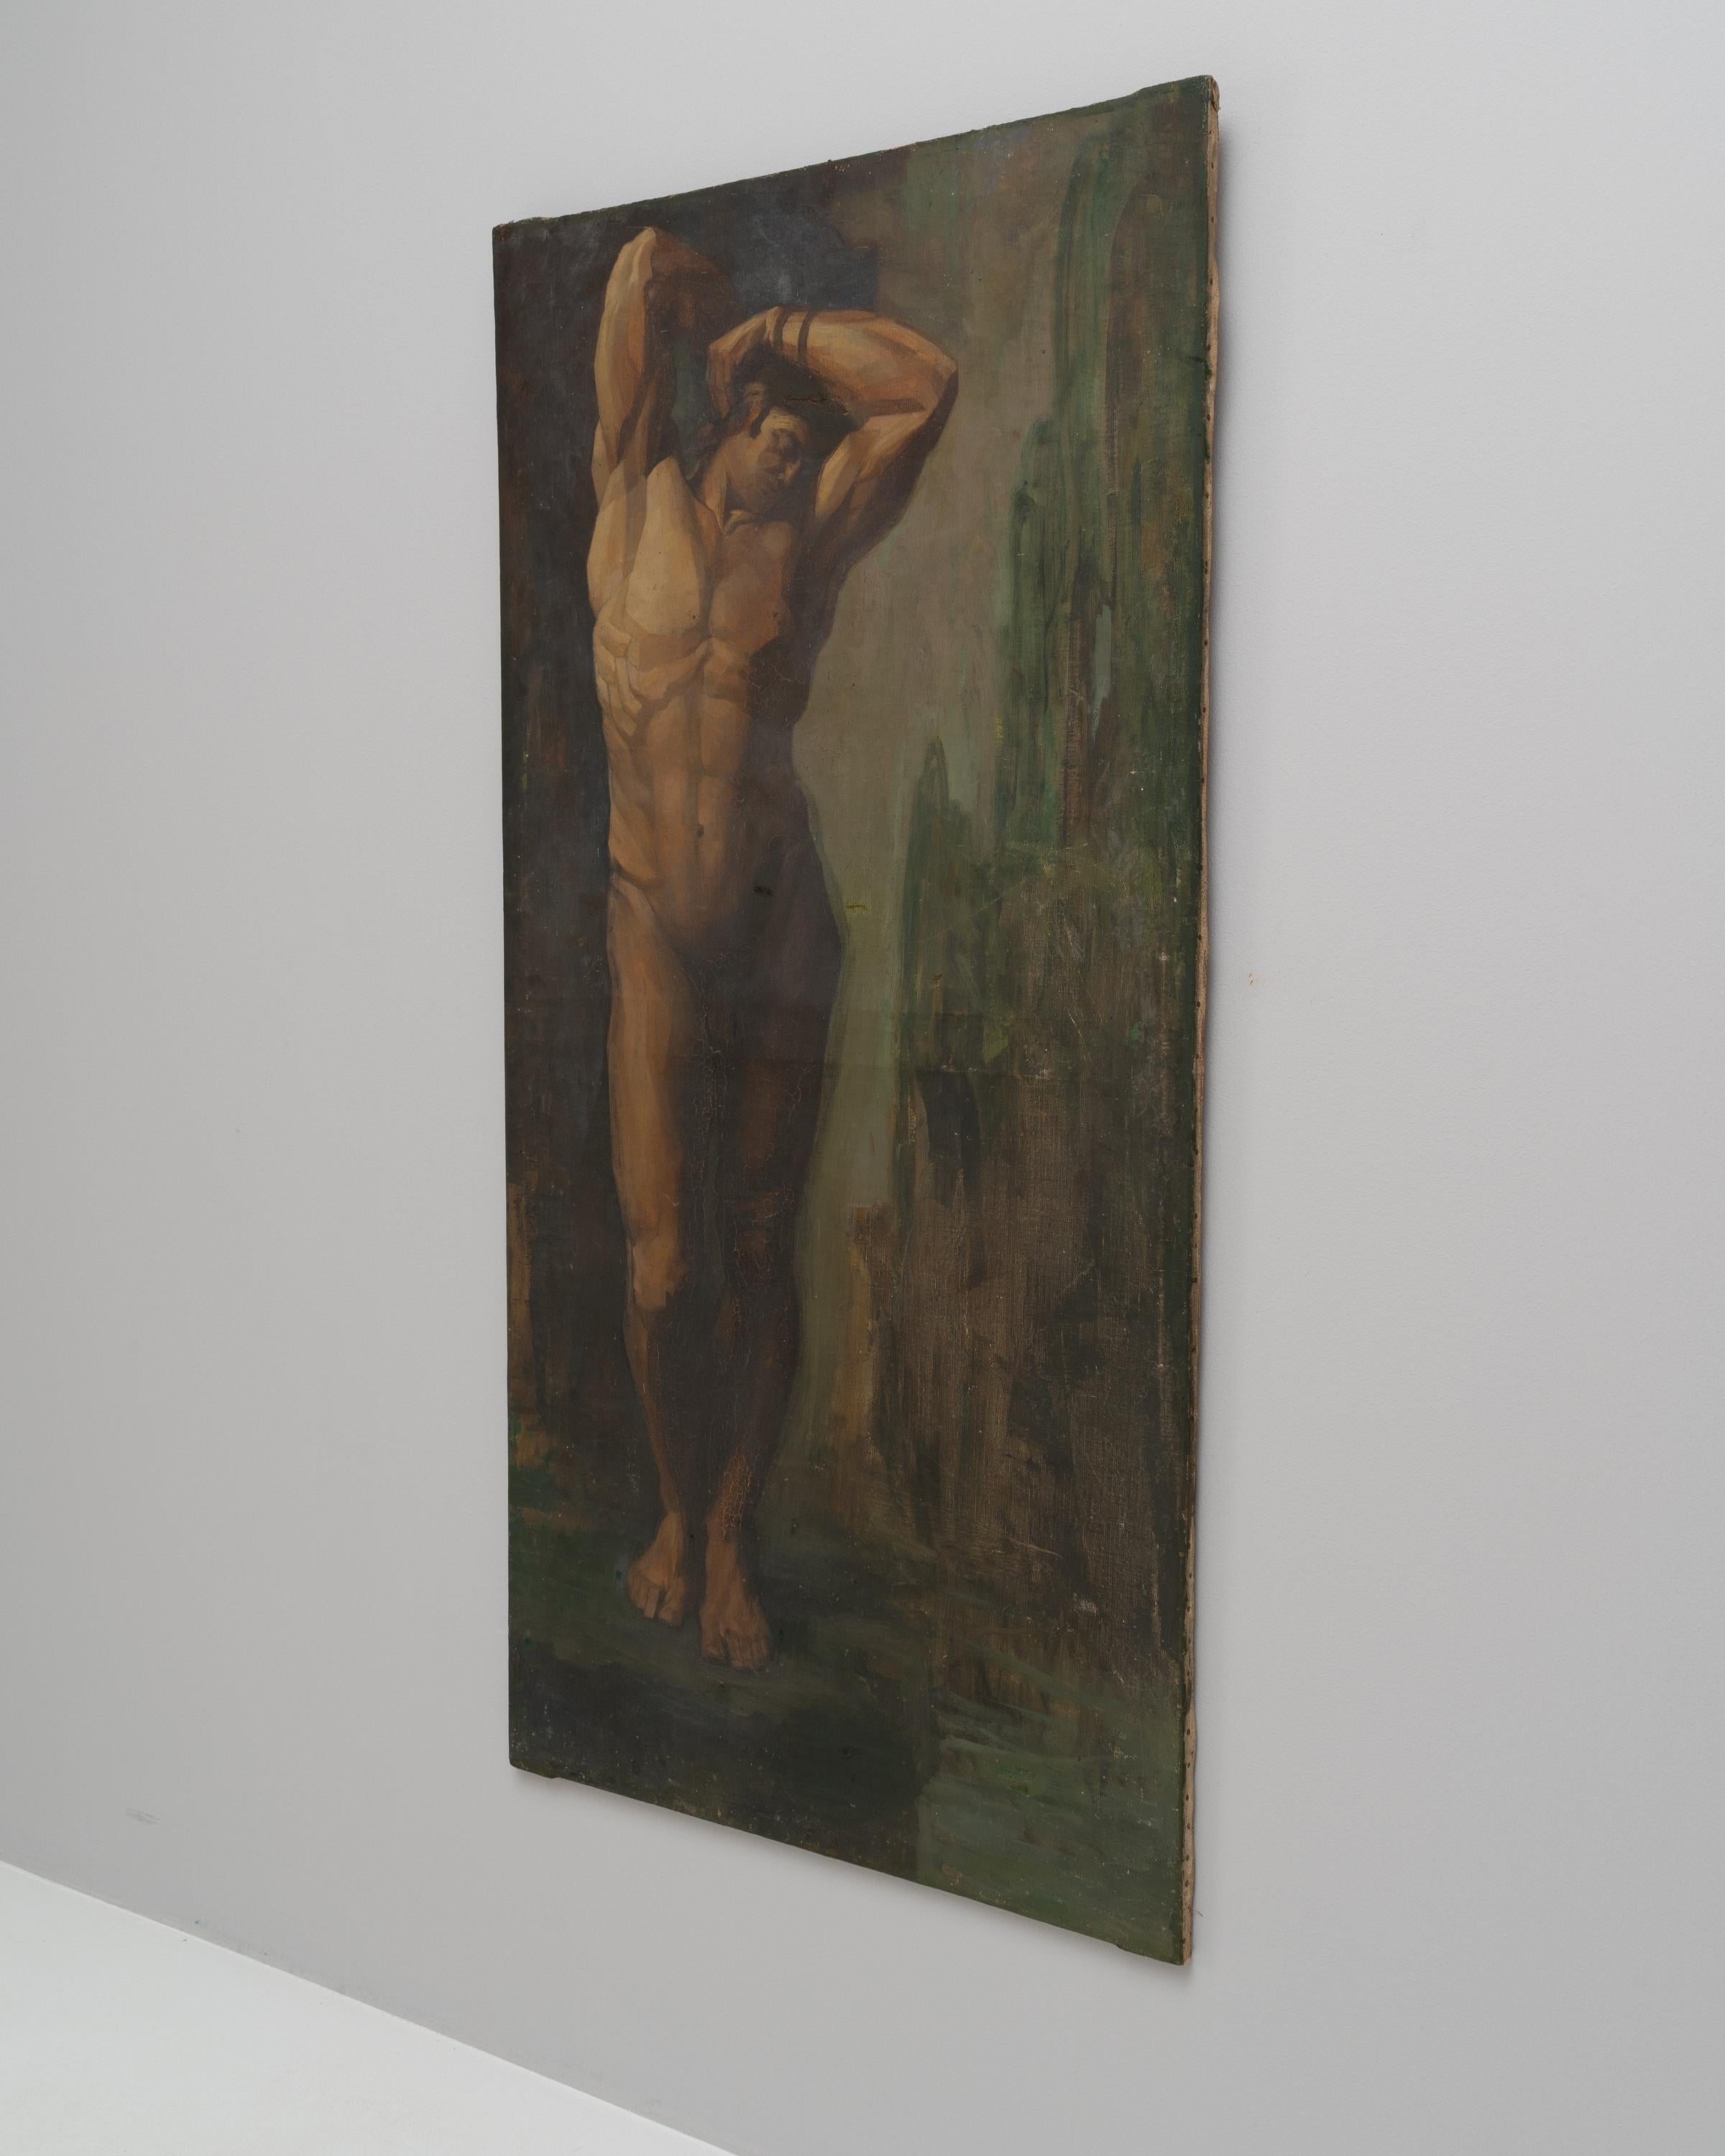 This 19th-century French painting captures the raw beauty and powerful grace of the human form with its striking depiction of a nude male figure. Rendered in a naturalistic style, the artist skillfully employs a rich palette of earthy tones to